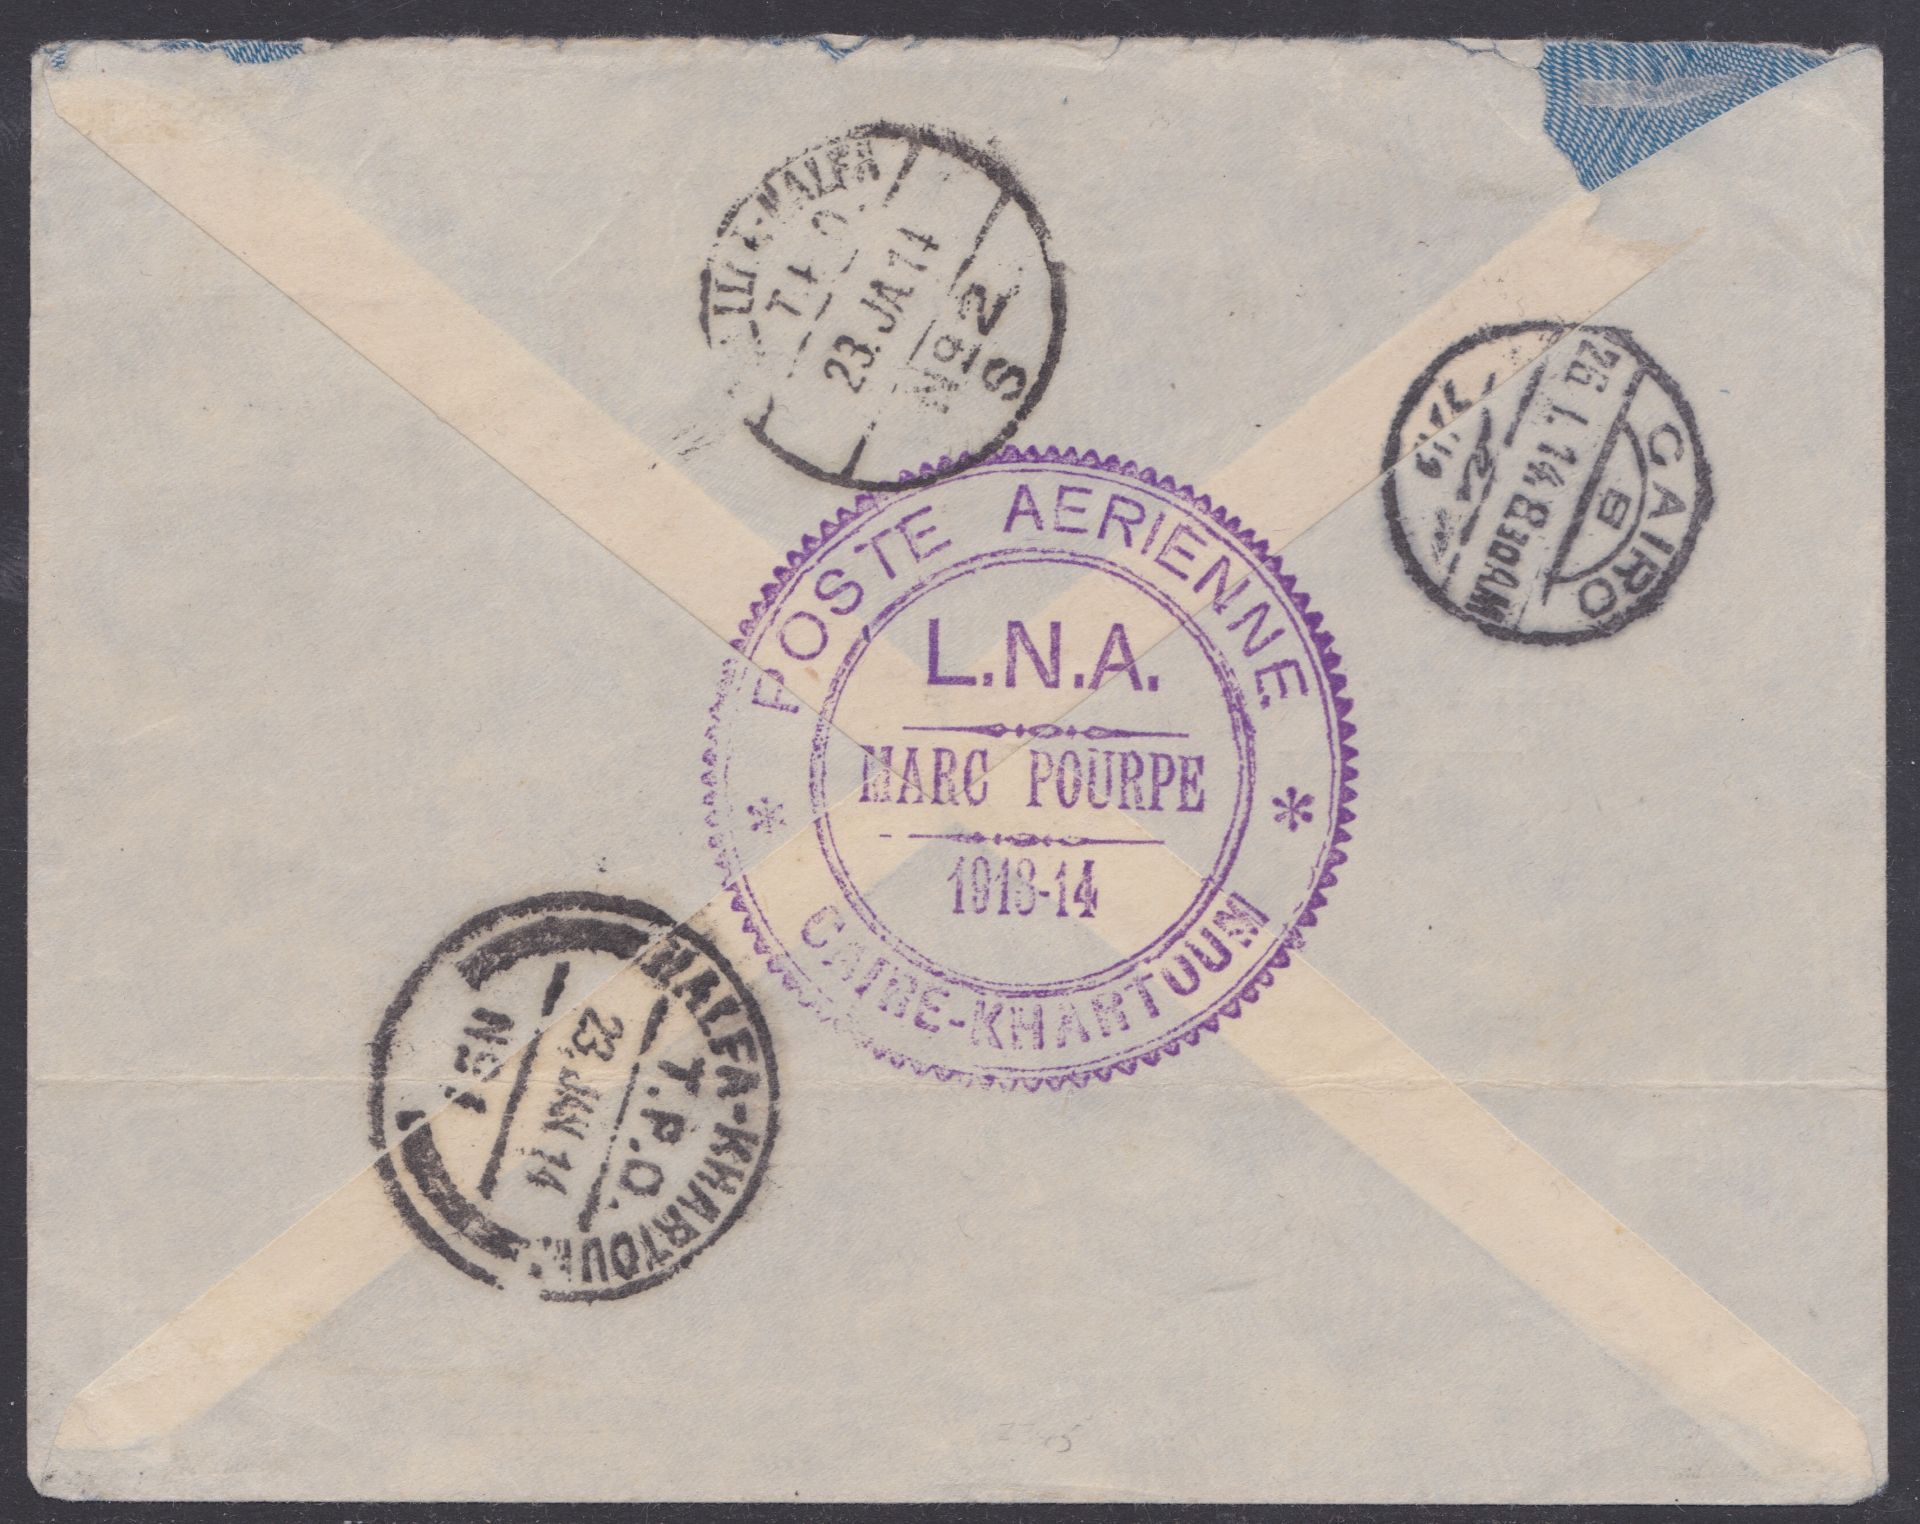 SUDAN / EGYPT - AIR MAILS 1914 (Jan 24) - Ligue Nationale Aerienne cover (light horizontal fold) - Image 2 of 2